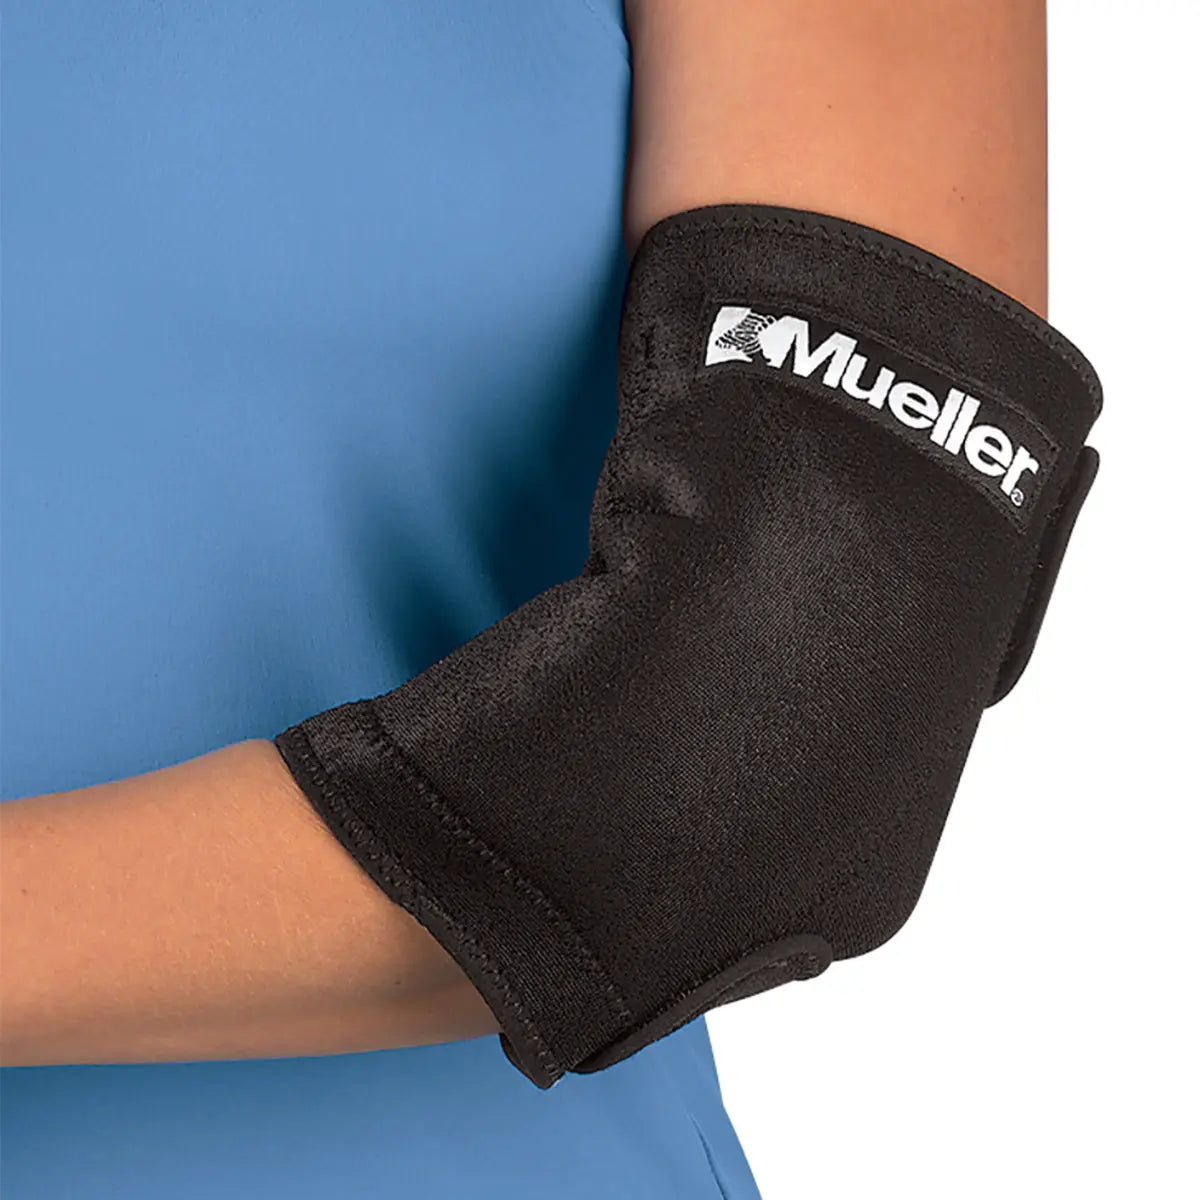 Mueller Reusable Cold-Hot Therapy Wrap - Small - Black Mueller Sports Medicine